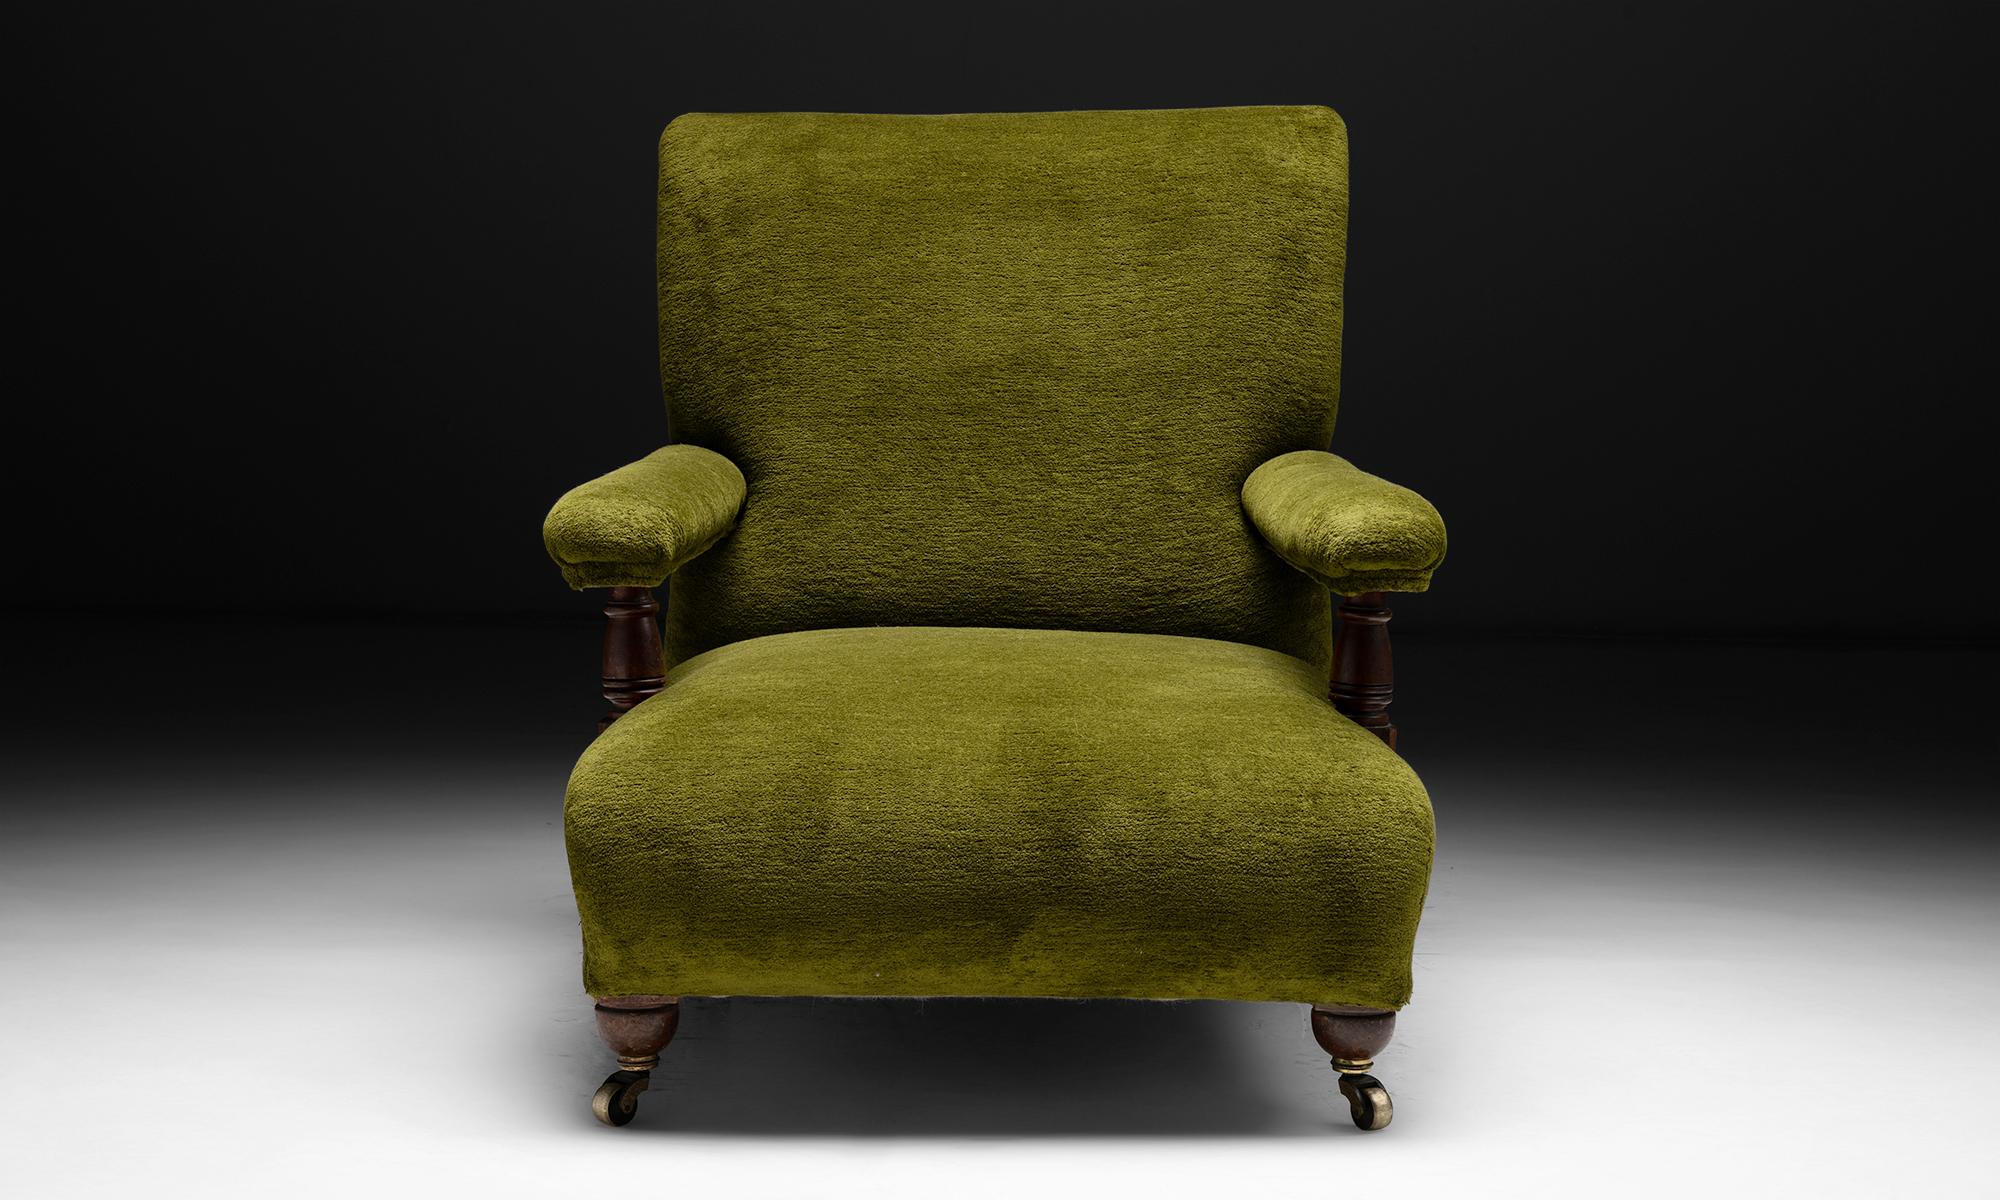 Turned Open Armchair in Chenille by Pierre Frey, England, circa 1900